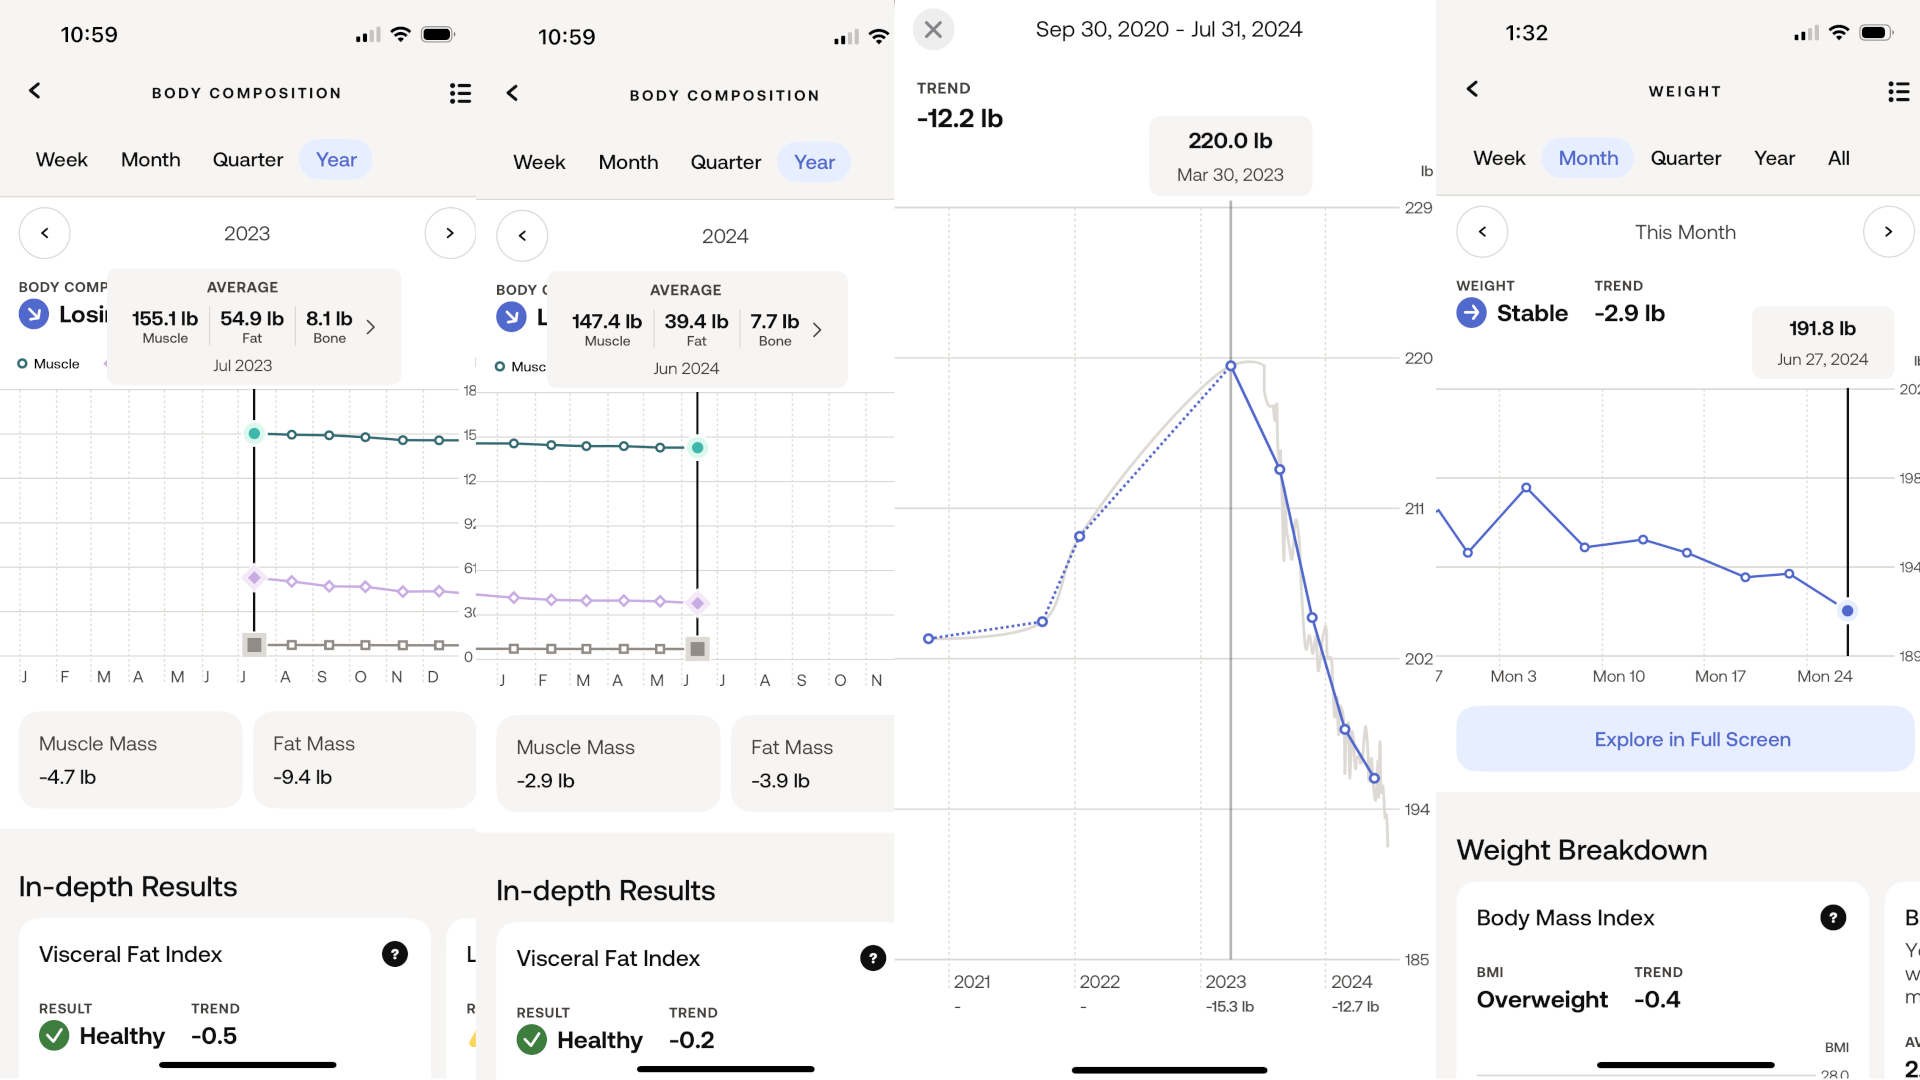 Withings app screenshots showing the author's weight-loss progress from 2023 to 2024. Some show body composition data like muscle and fat percentages, while others show falling weight.